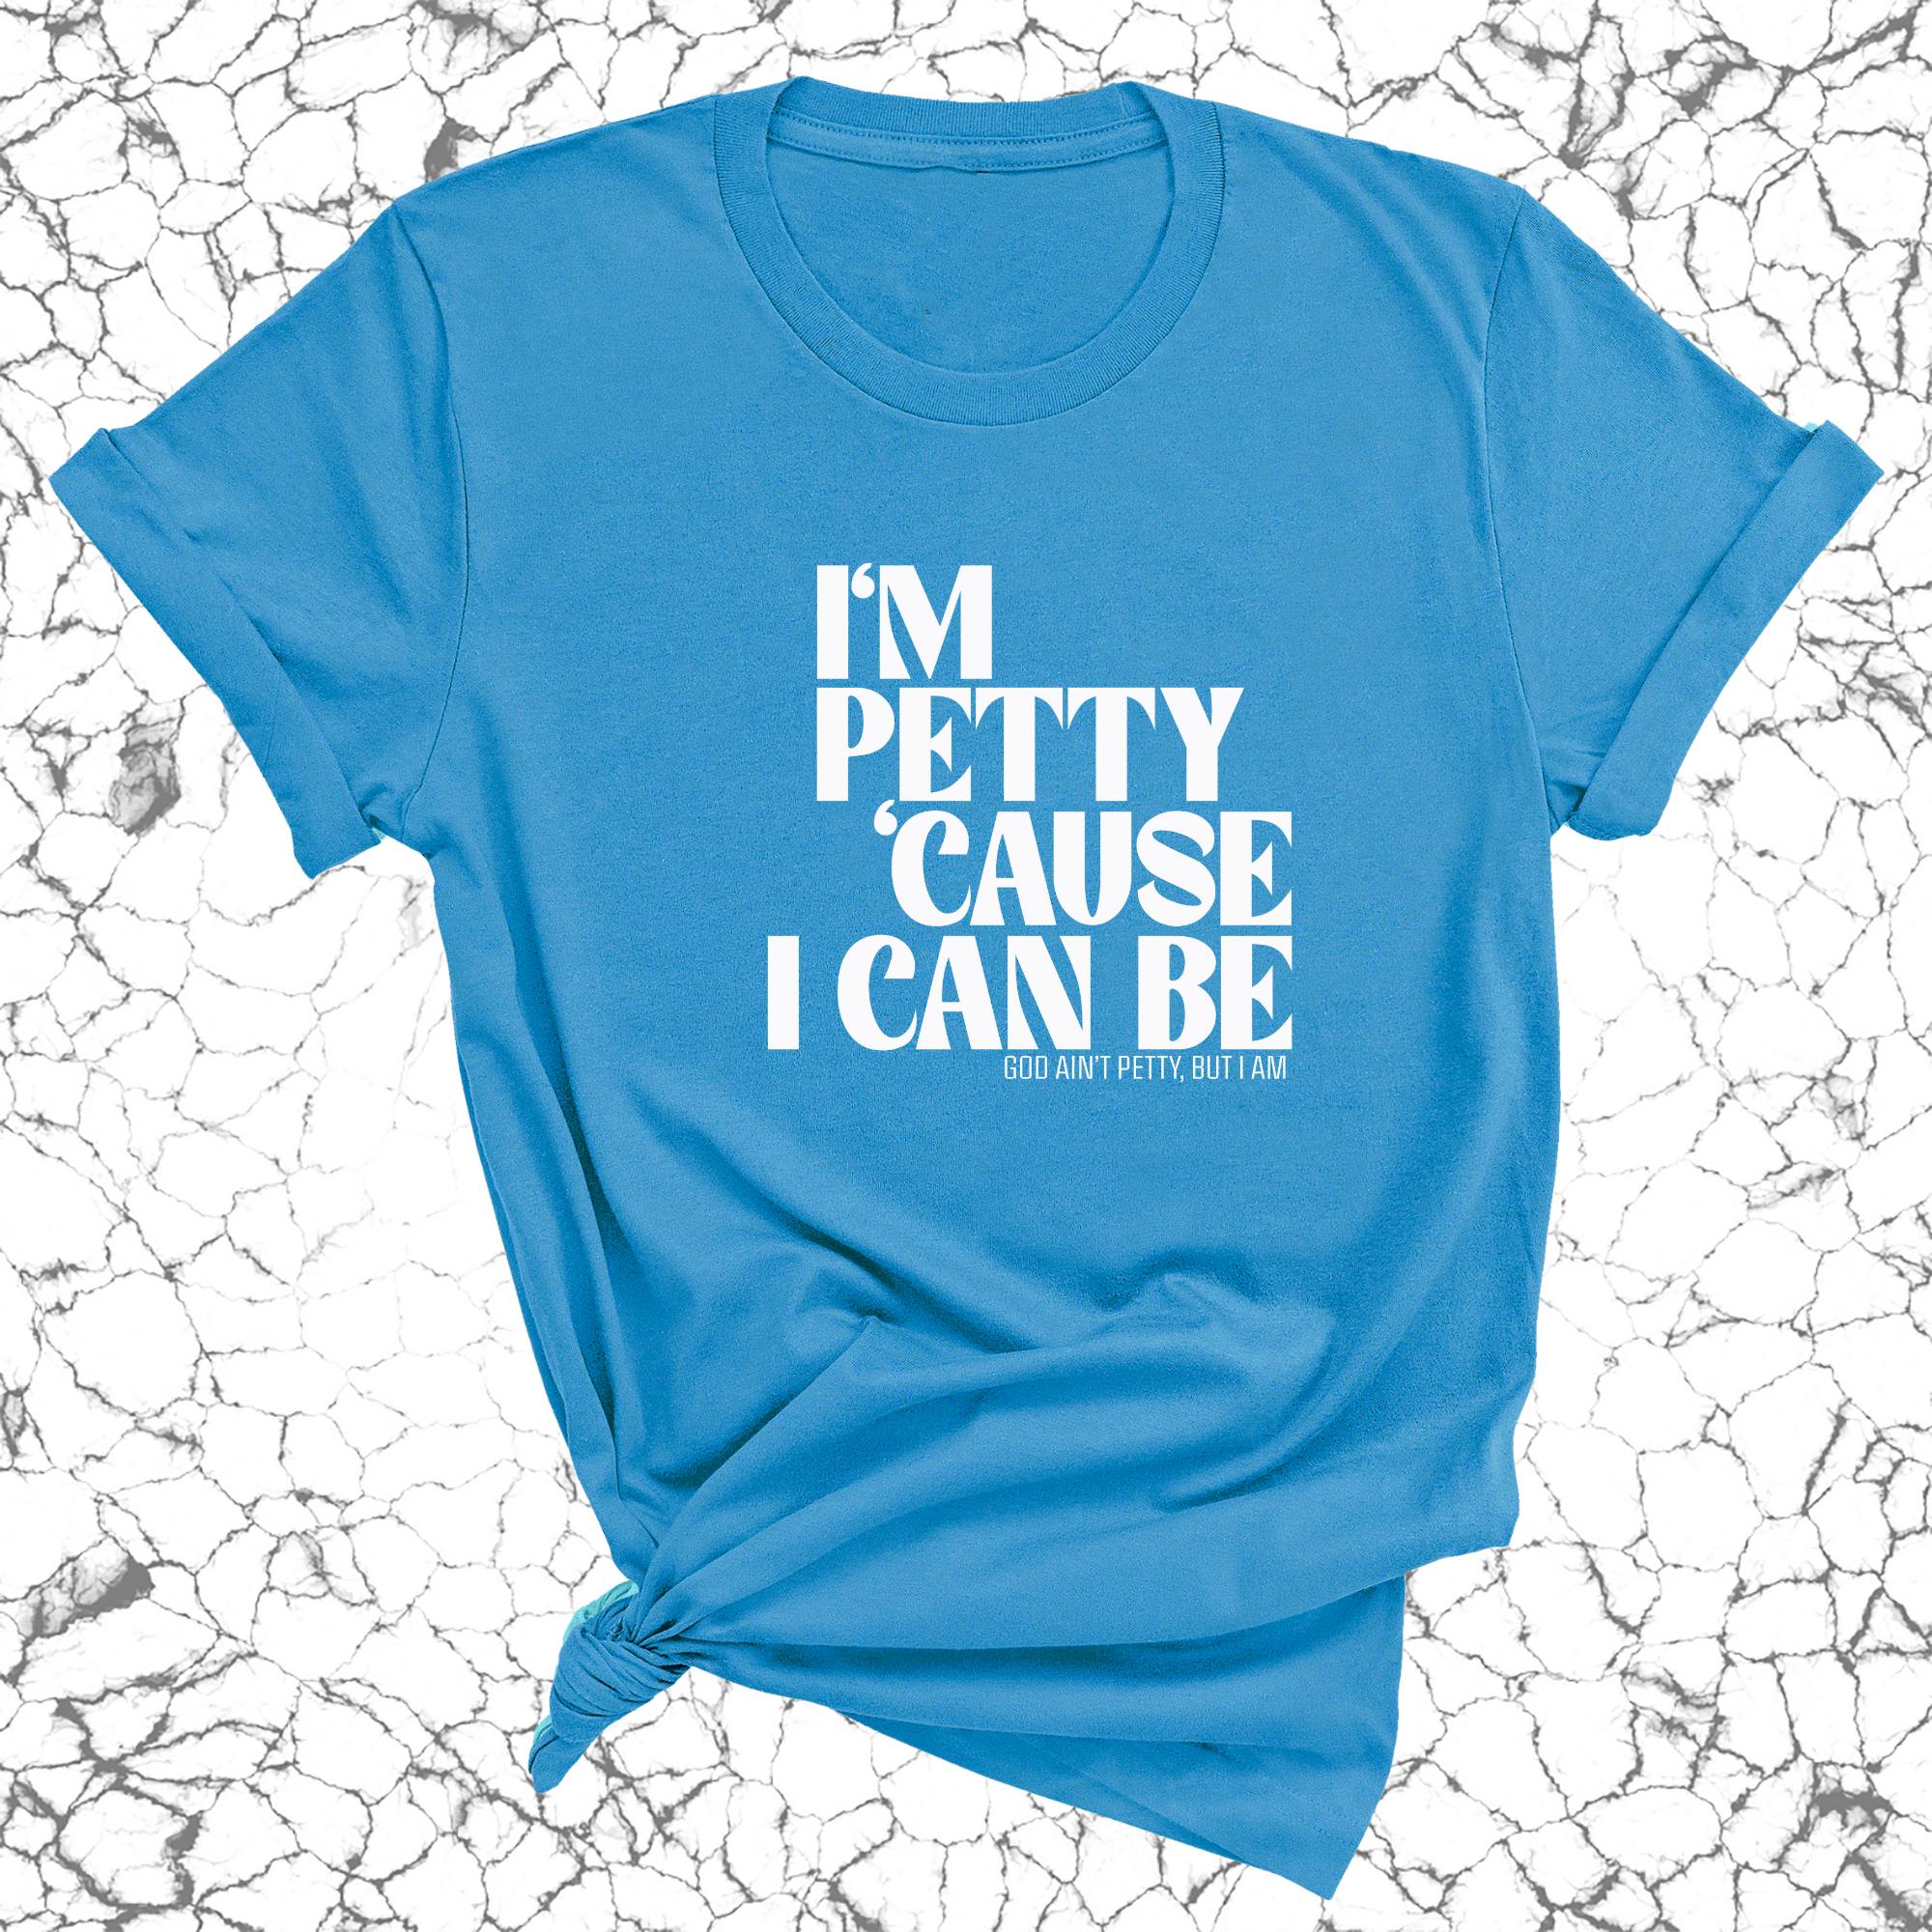 I'm petty cause I can be Unisex Tee-T-Shirt-The Original God Ain't Petty But I Am